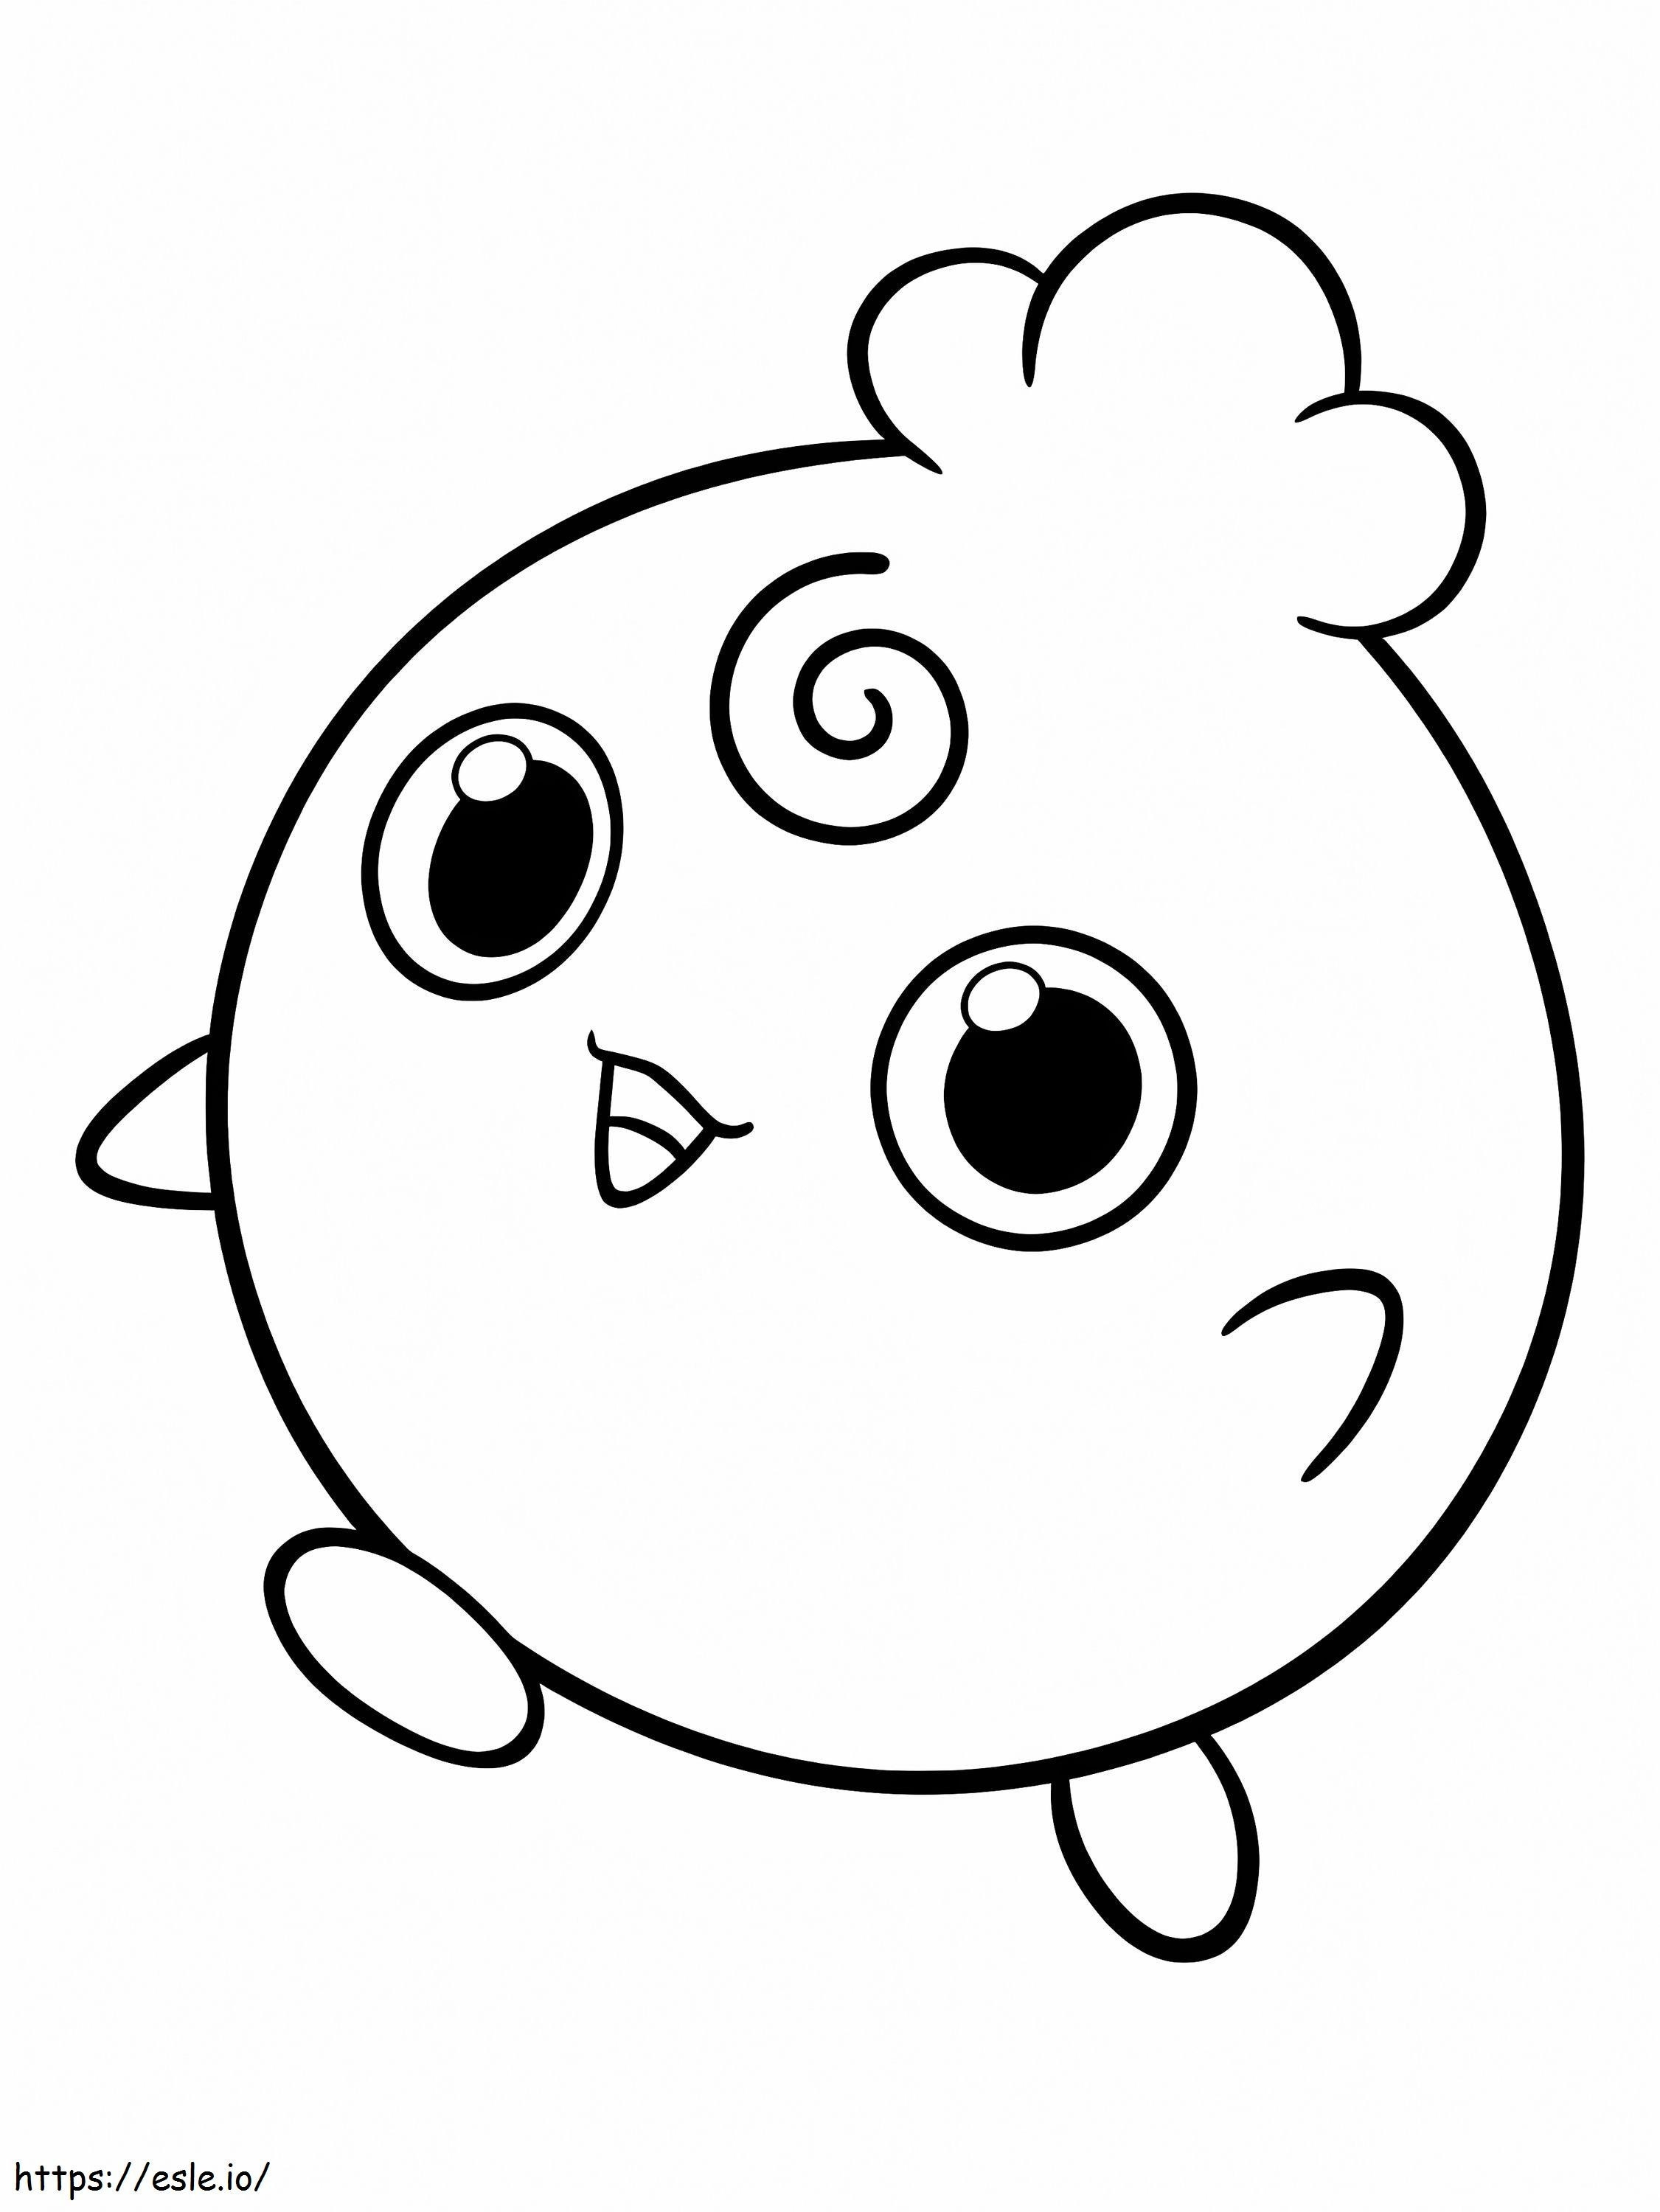 Cute Igglybuff Pokemon coloring page